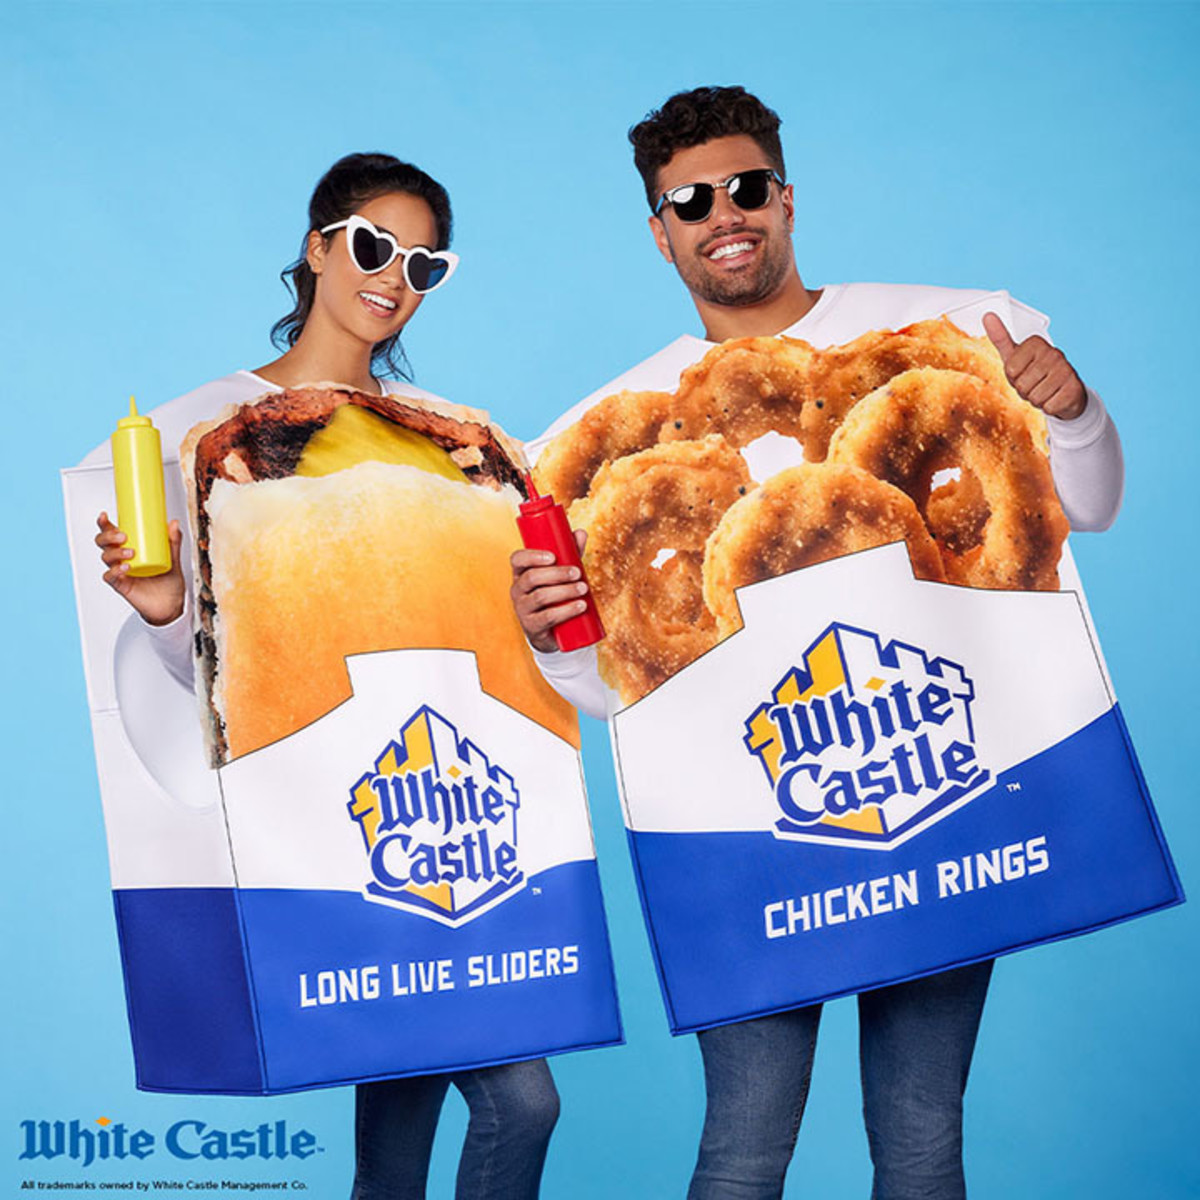 White Castle Costumes - Get Them From Spirit Halloween Shops Online